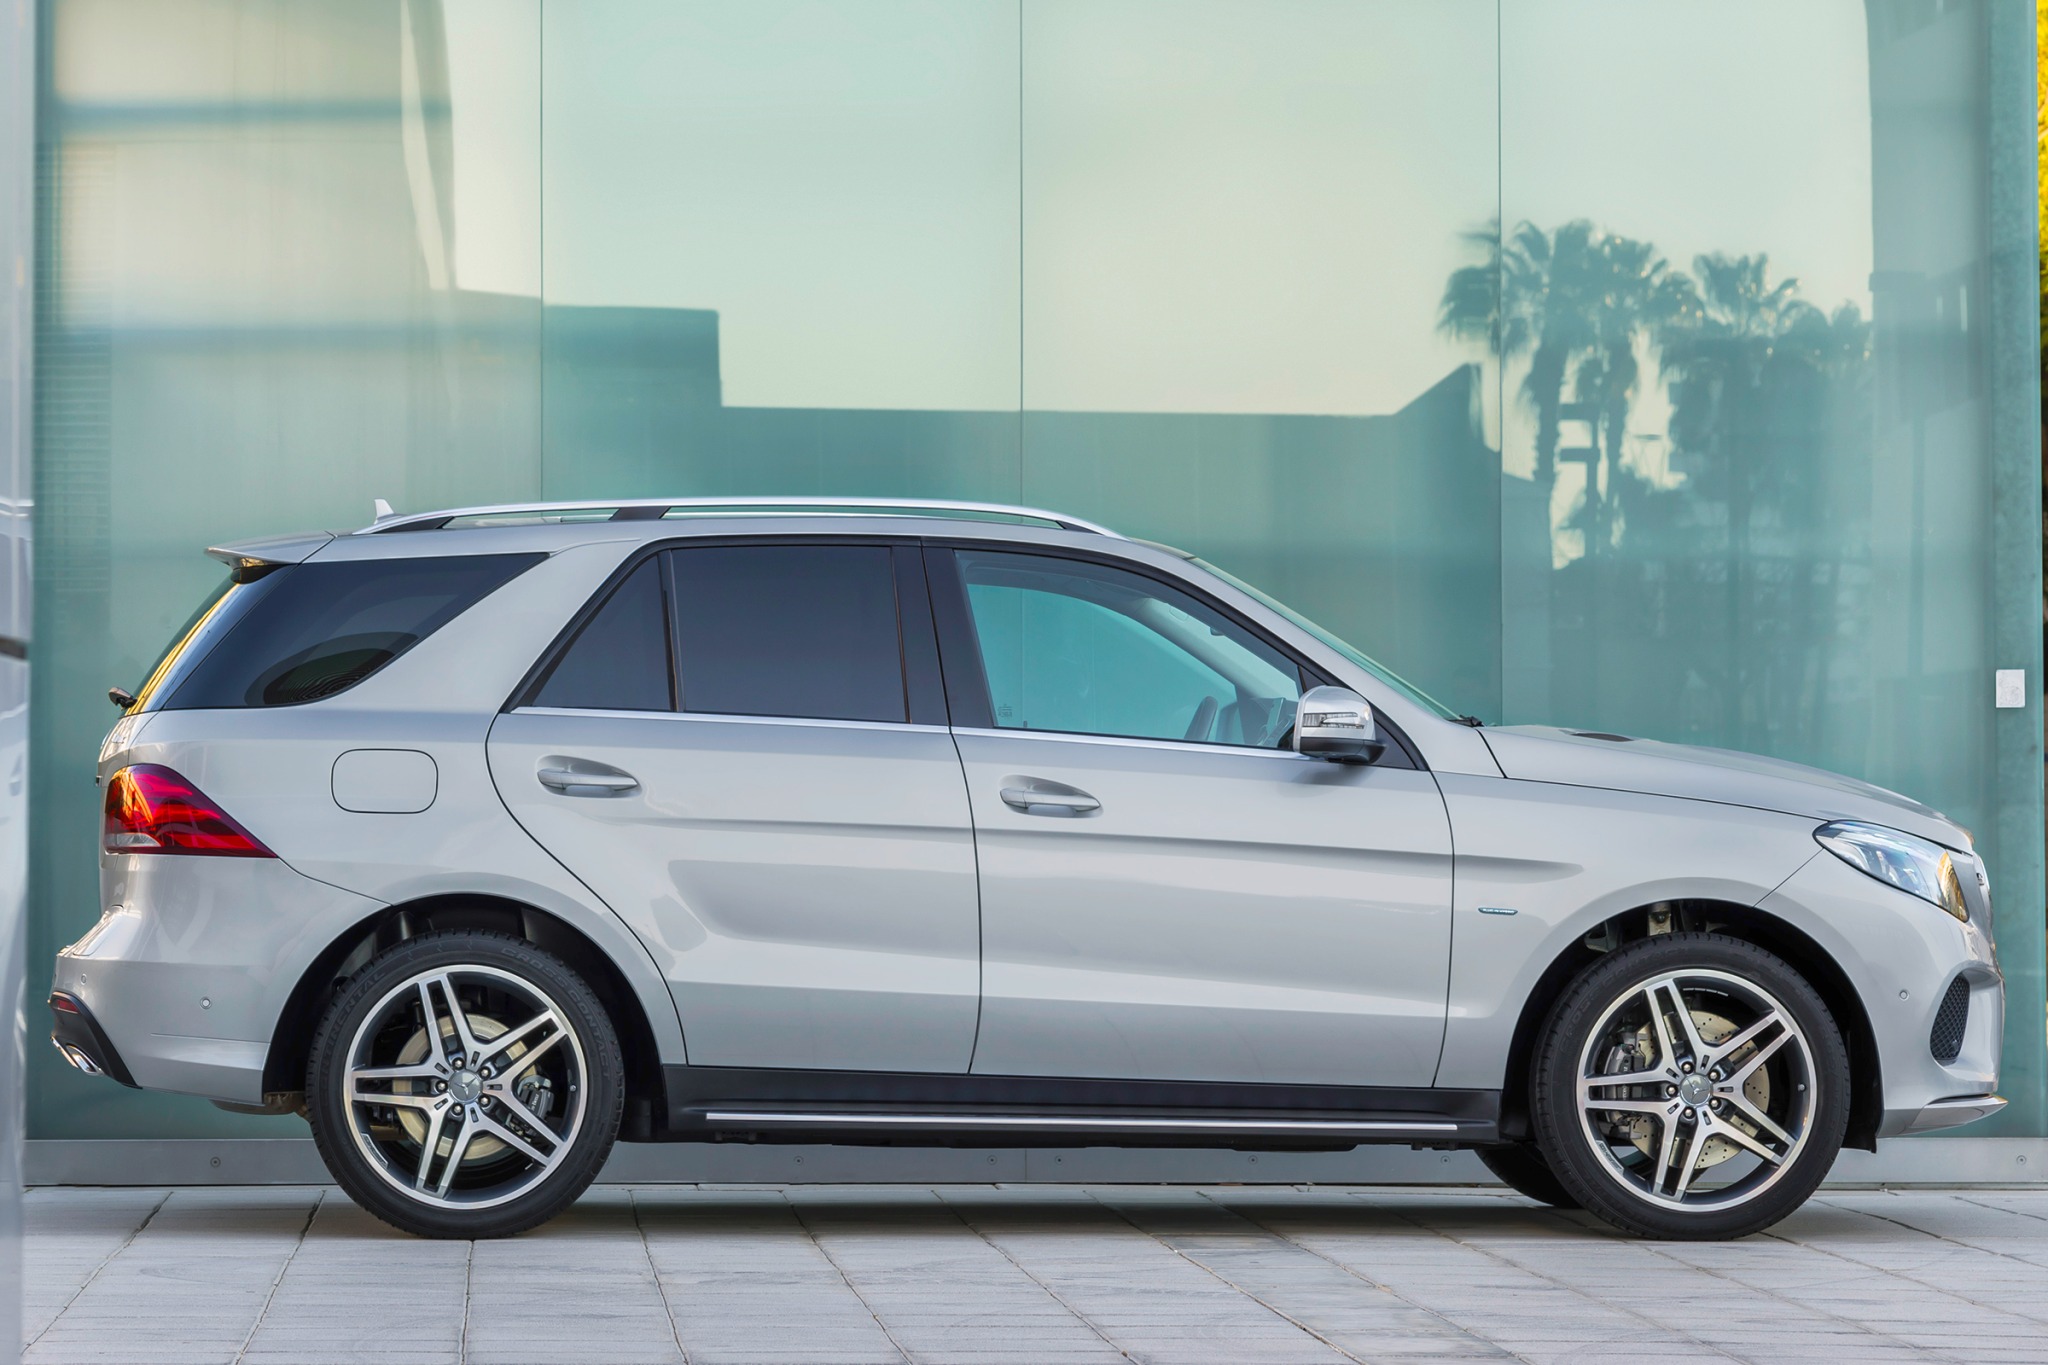 2016 Mercedes-Benz GLE-Class VIN Number Search - AutoDetective